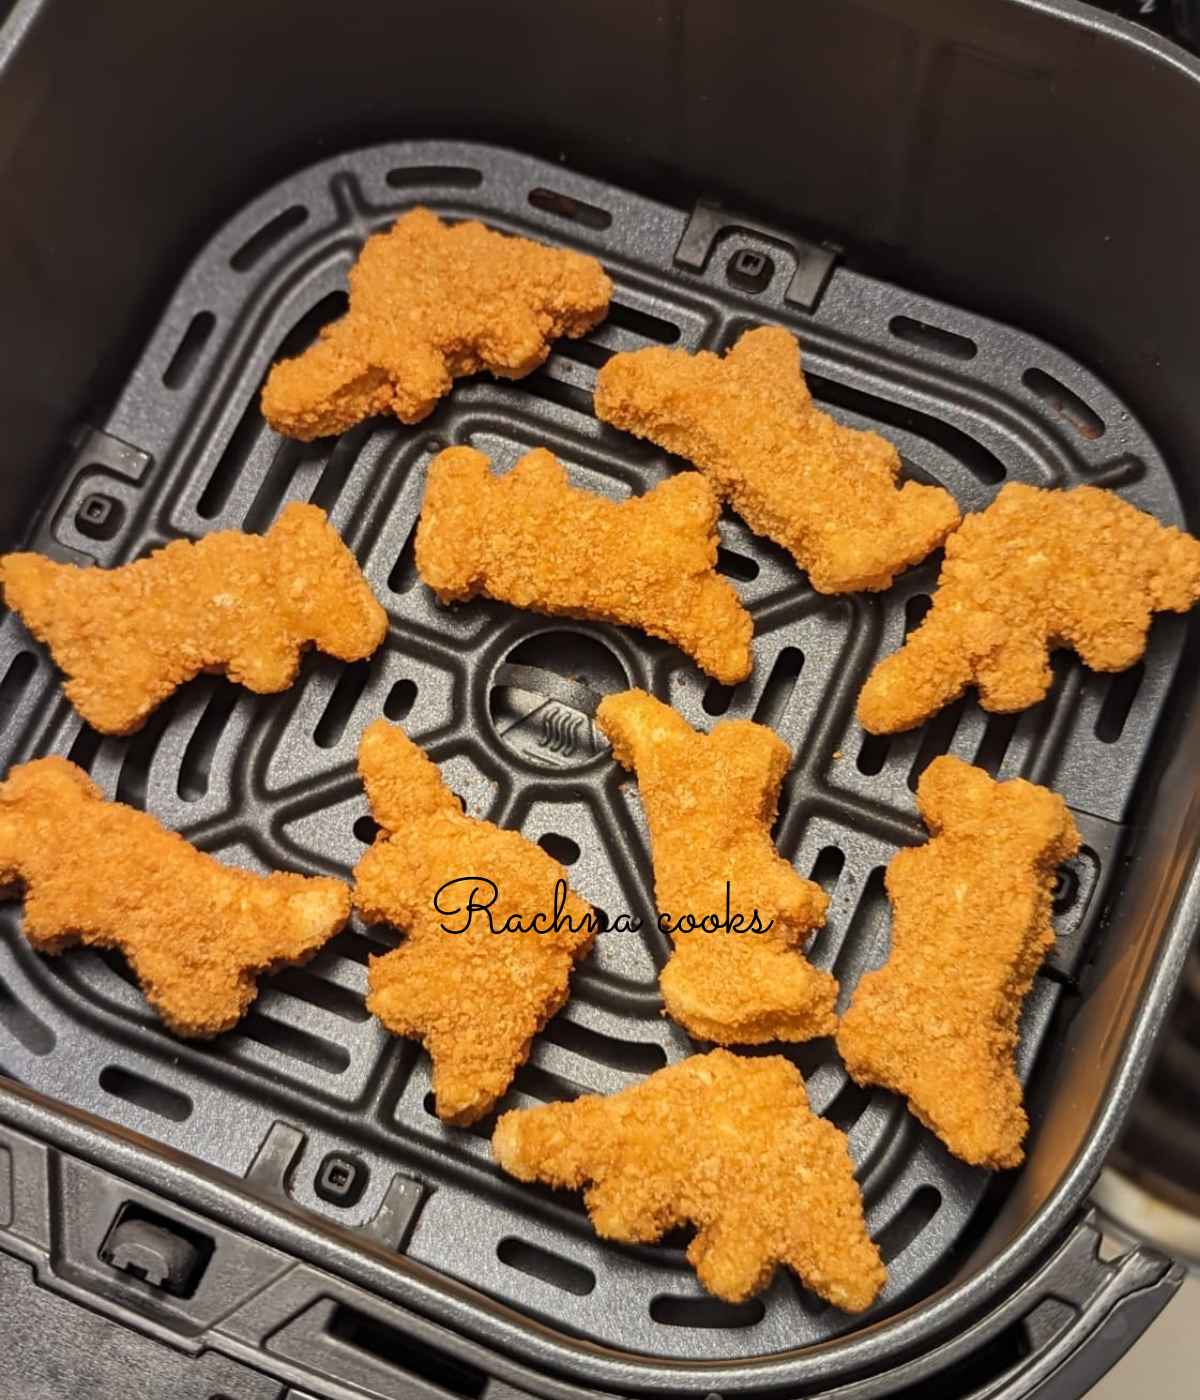 Frozen dino nuggets placed in air fryer basket for air frying.